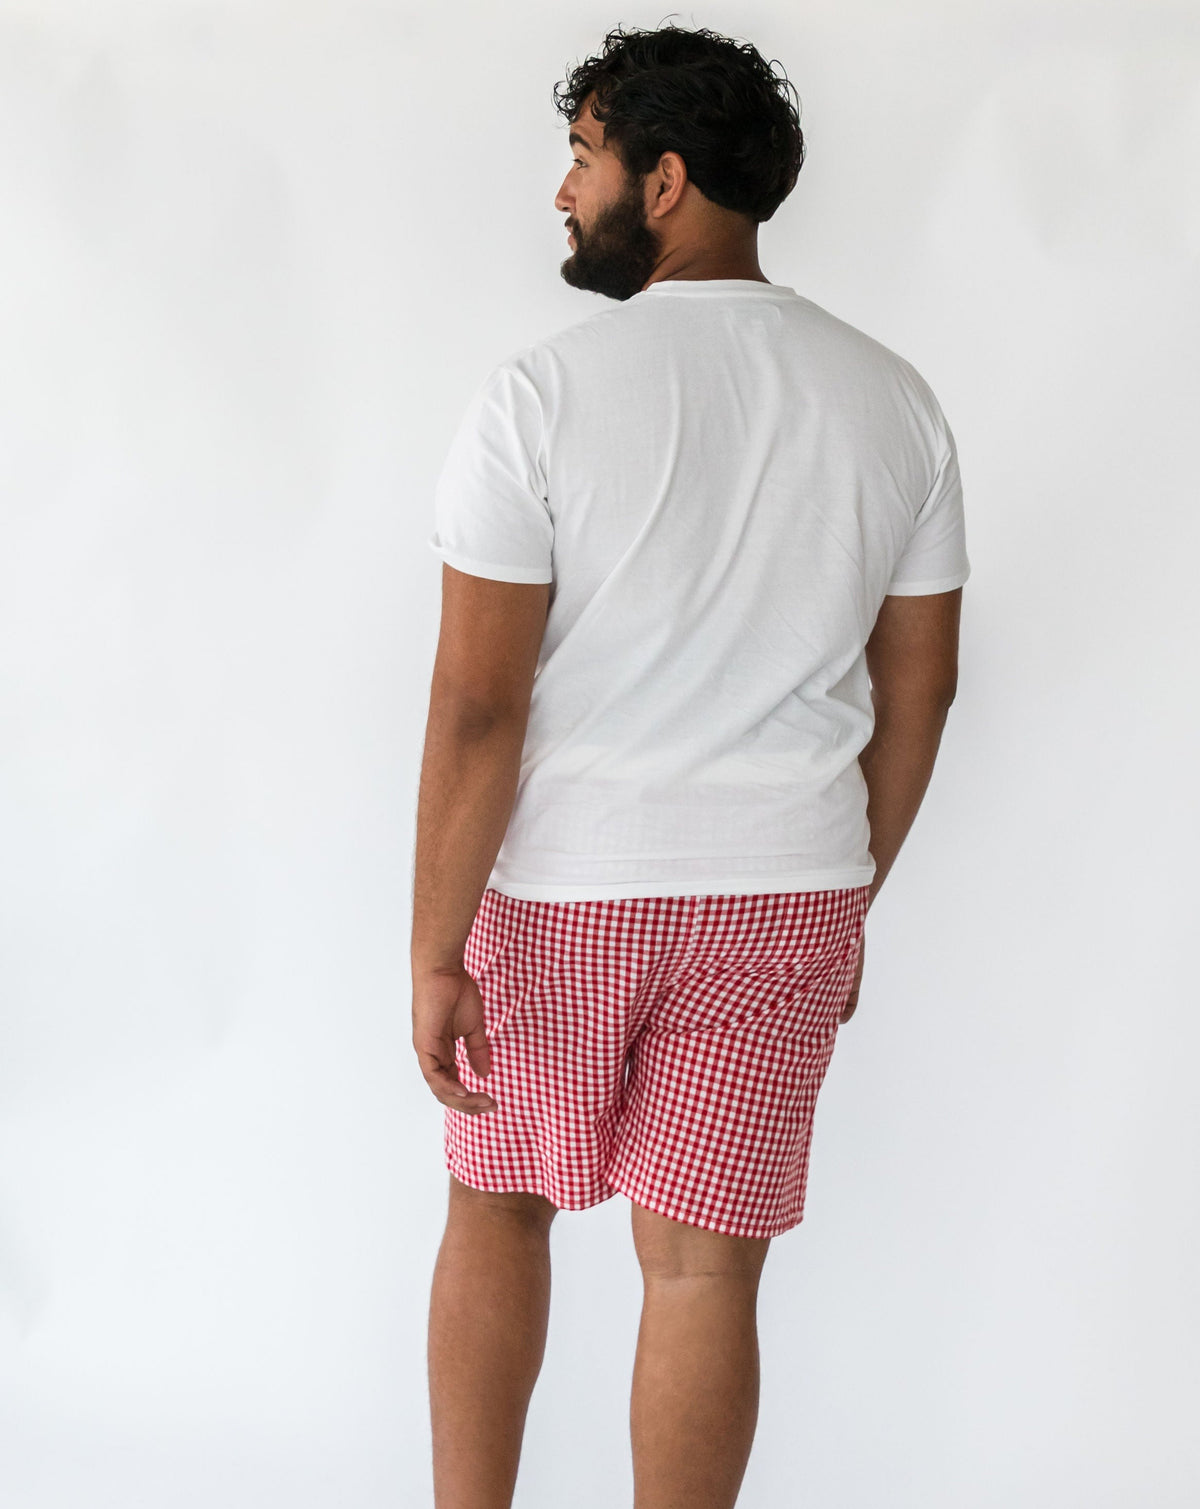 Men's Holiday Red and White Gingham shorts - Back